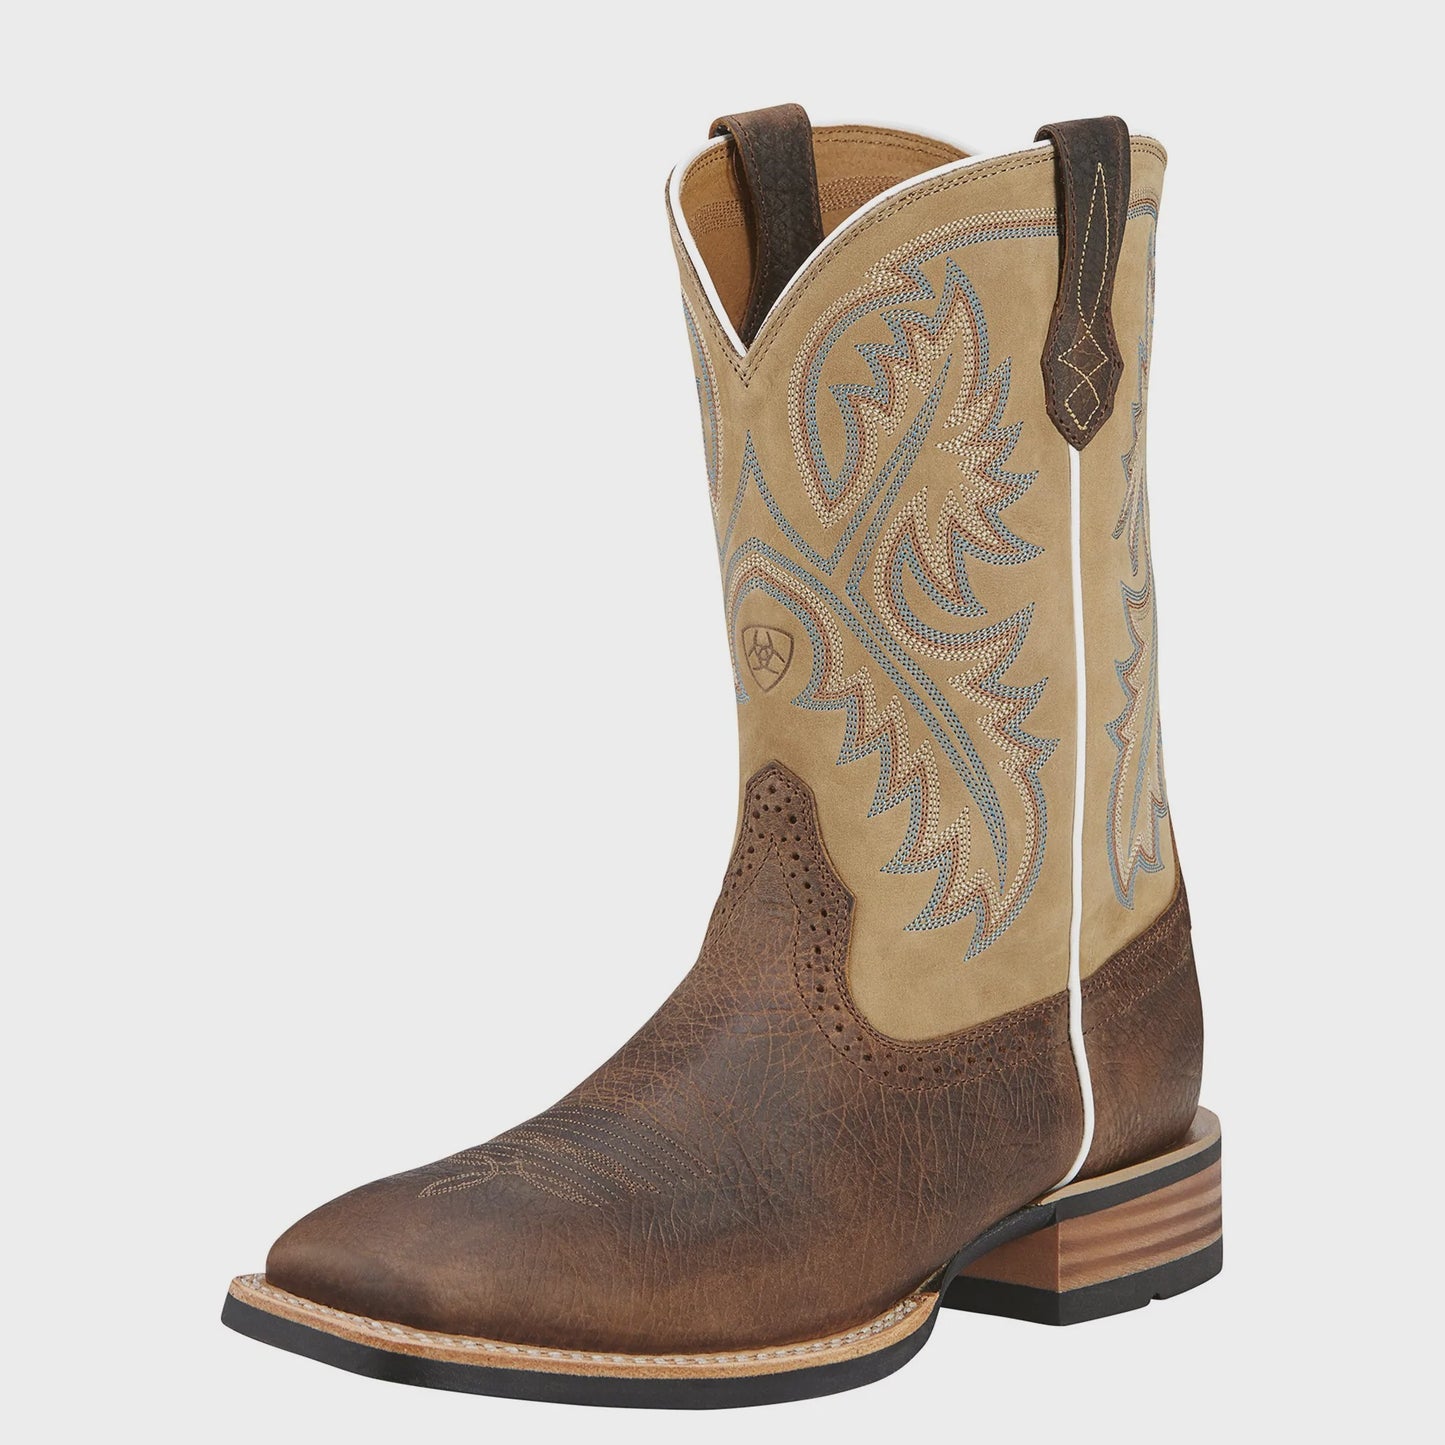 ARIAT Mns Quickdraw ” Wide Square Toe Western Boots”